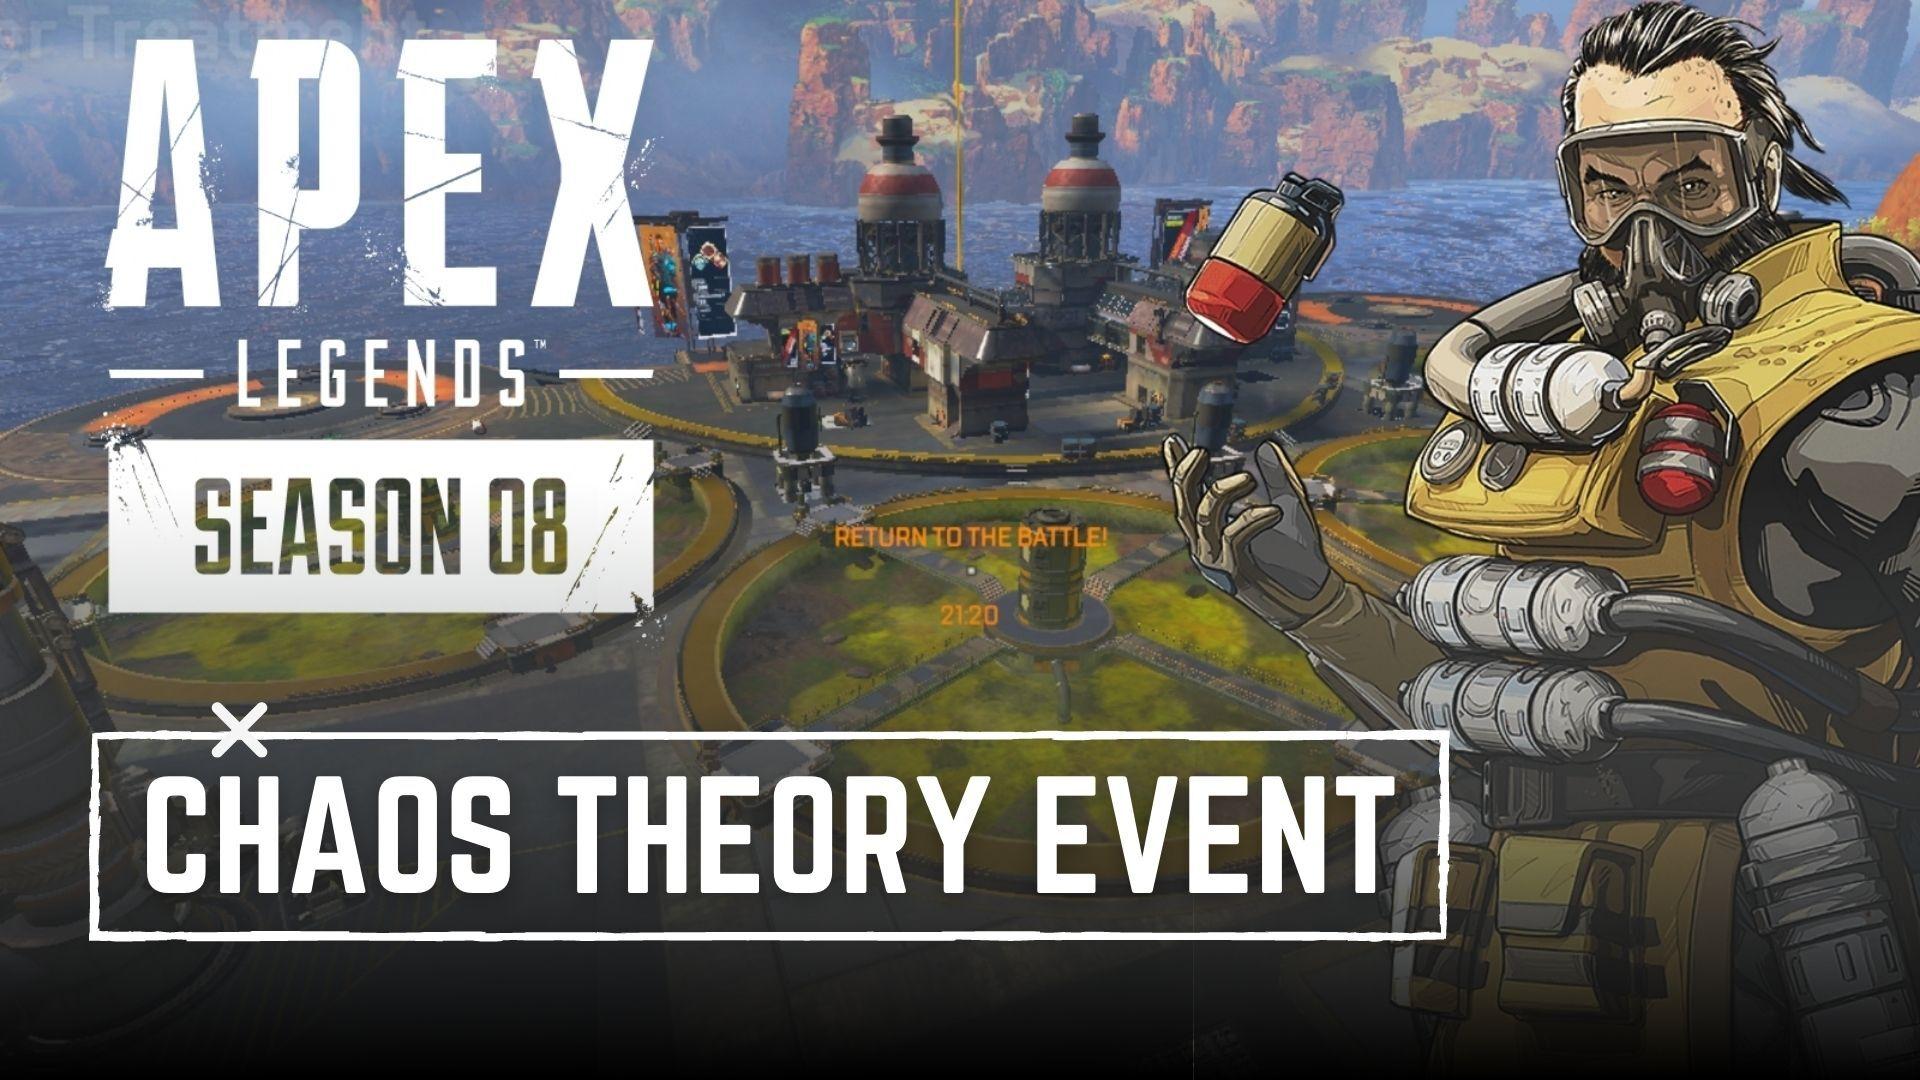 Chaost Theory event in apex legends